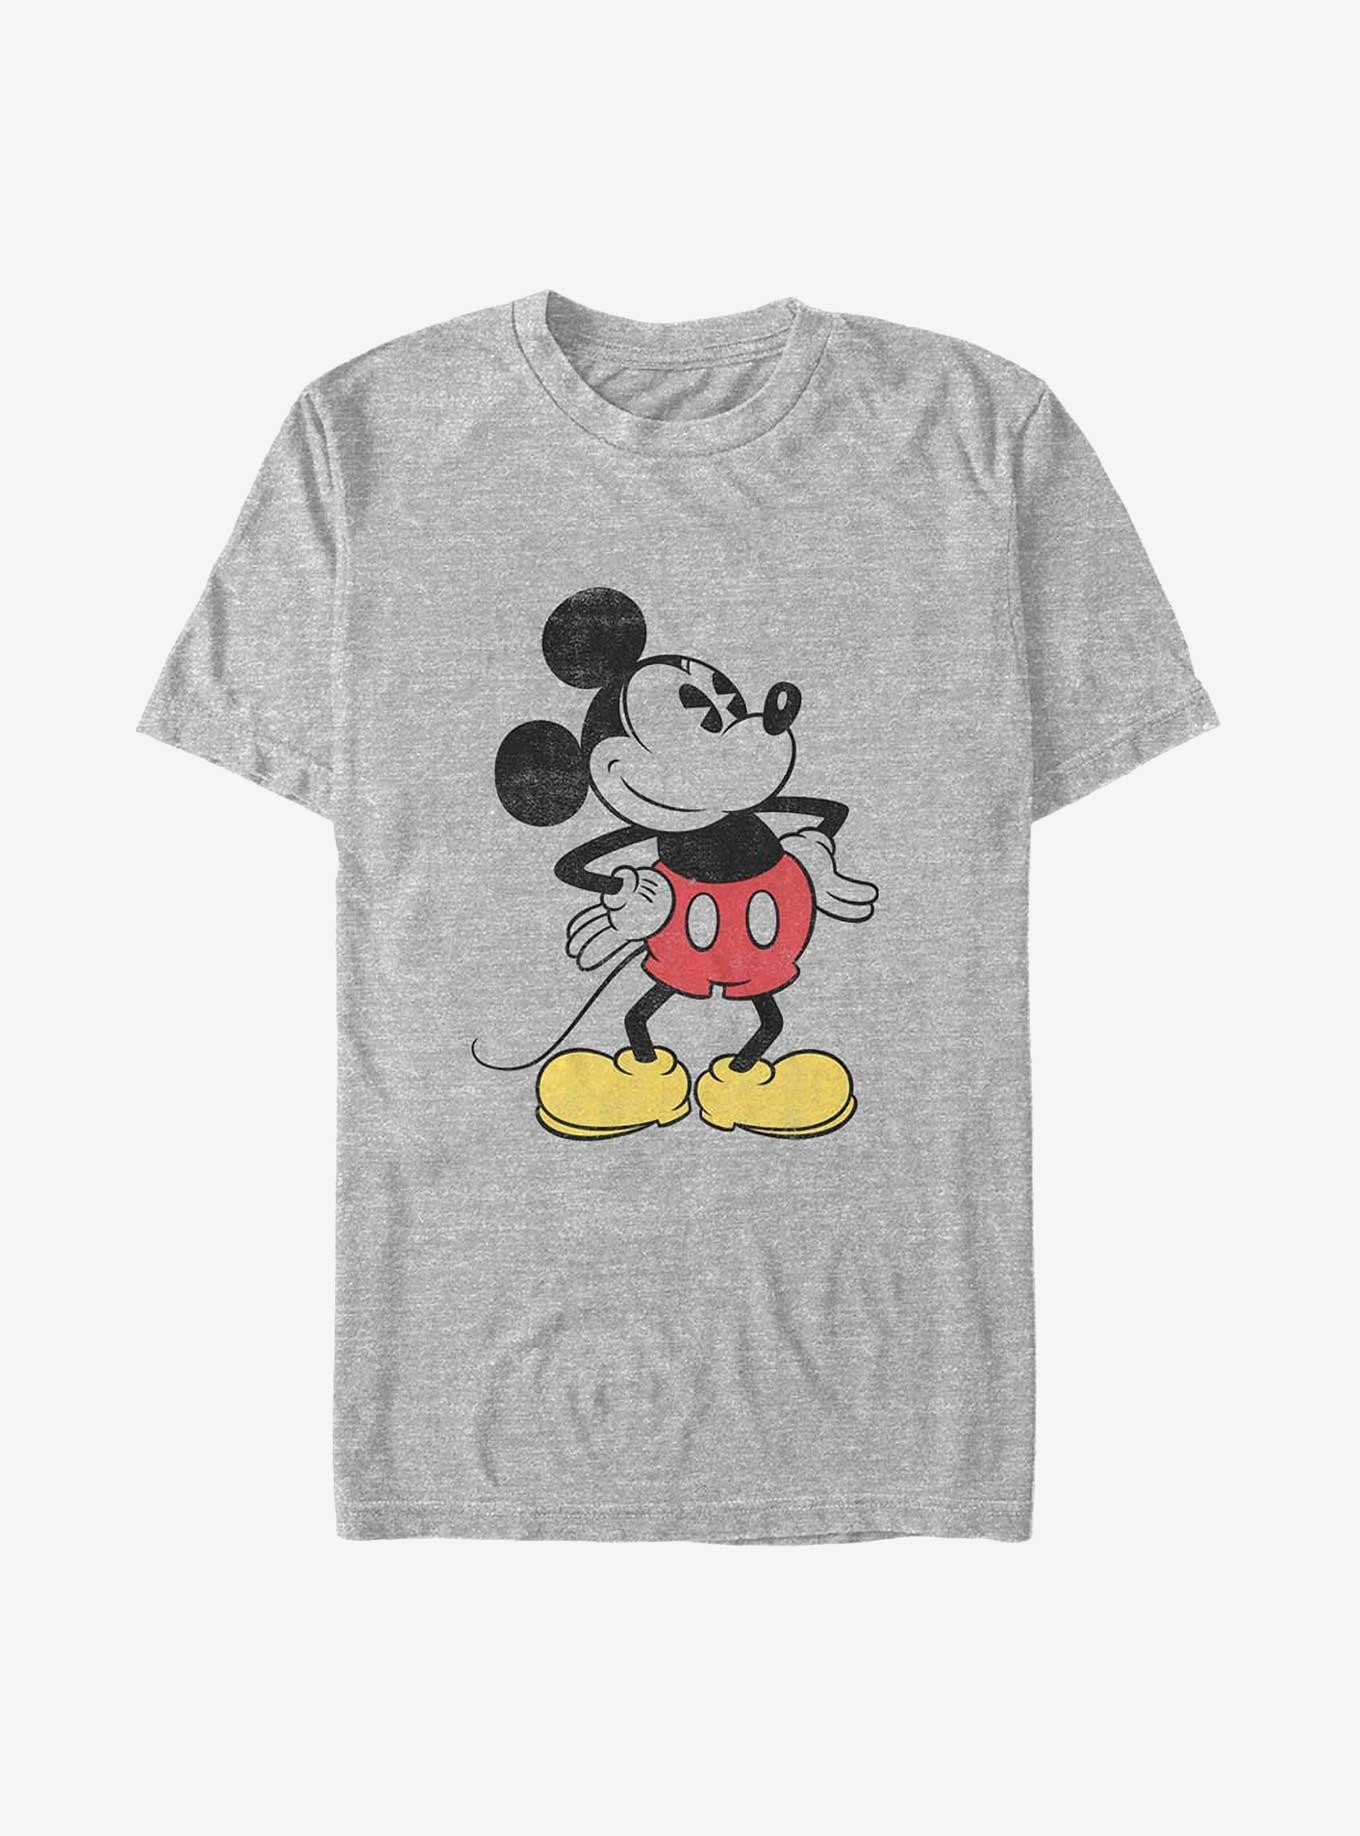 Disney Mickey Mouse Classic Distressed Standing T-Shirt (Grey Heather, X-Large)